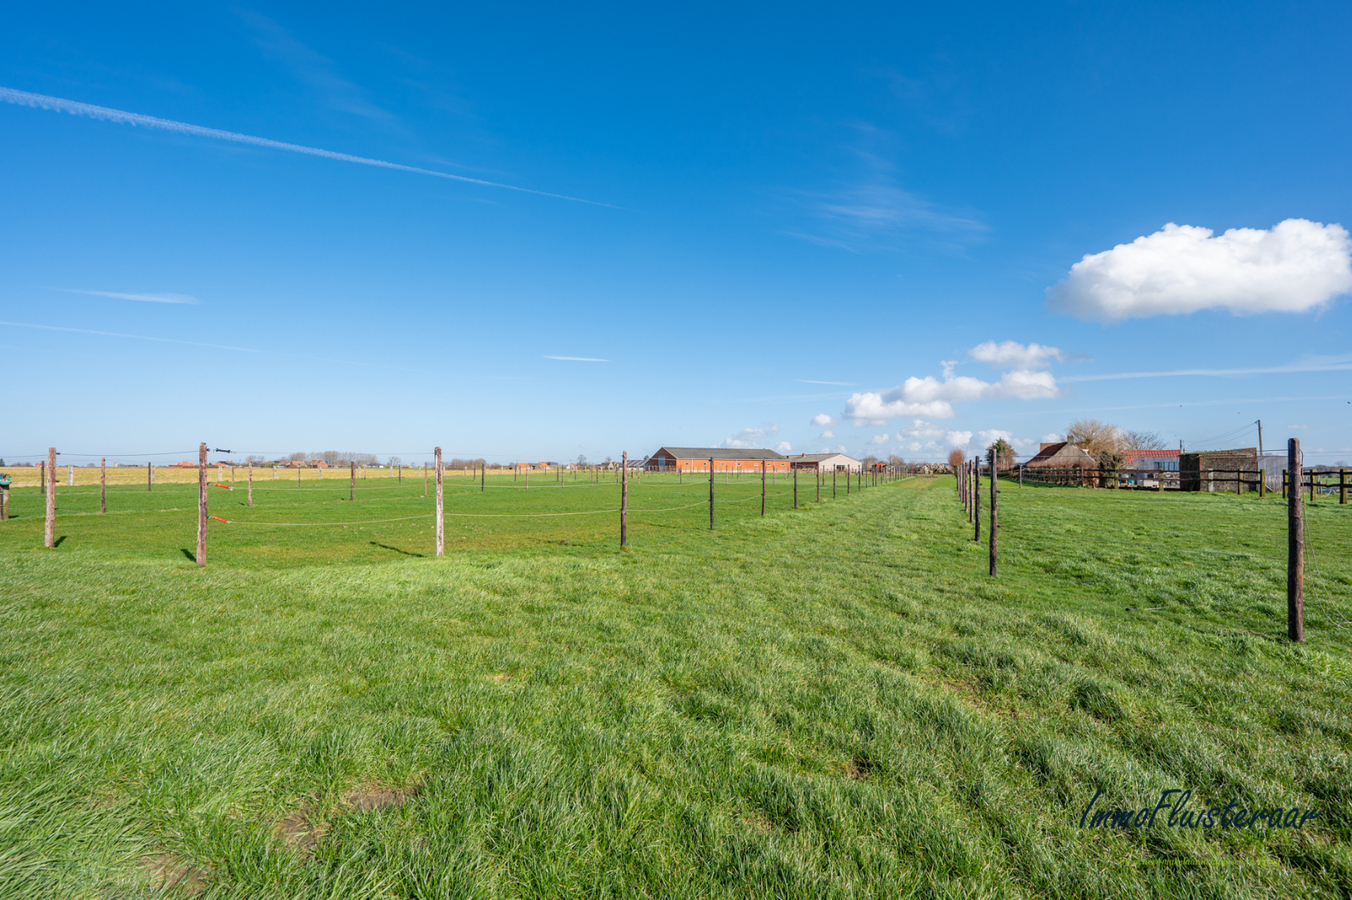 Property for sale |  with option - with restrictions in Koekelare